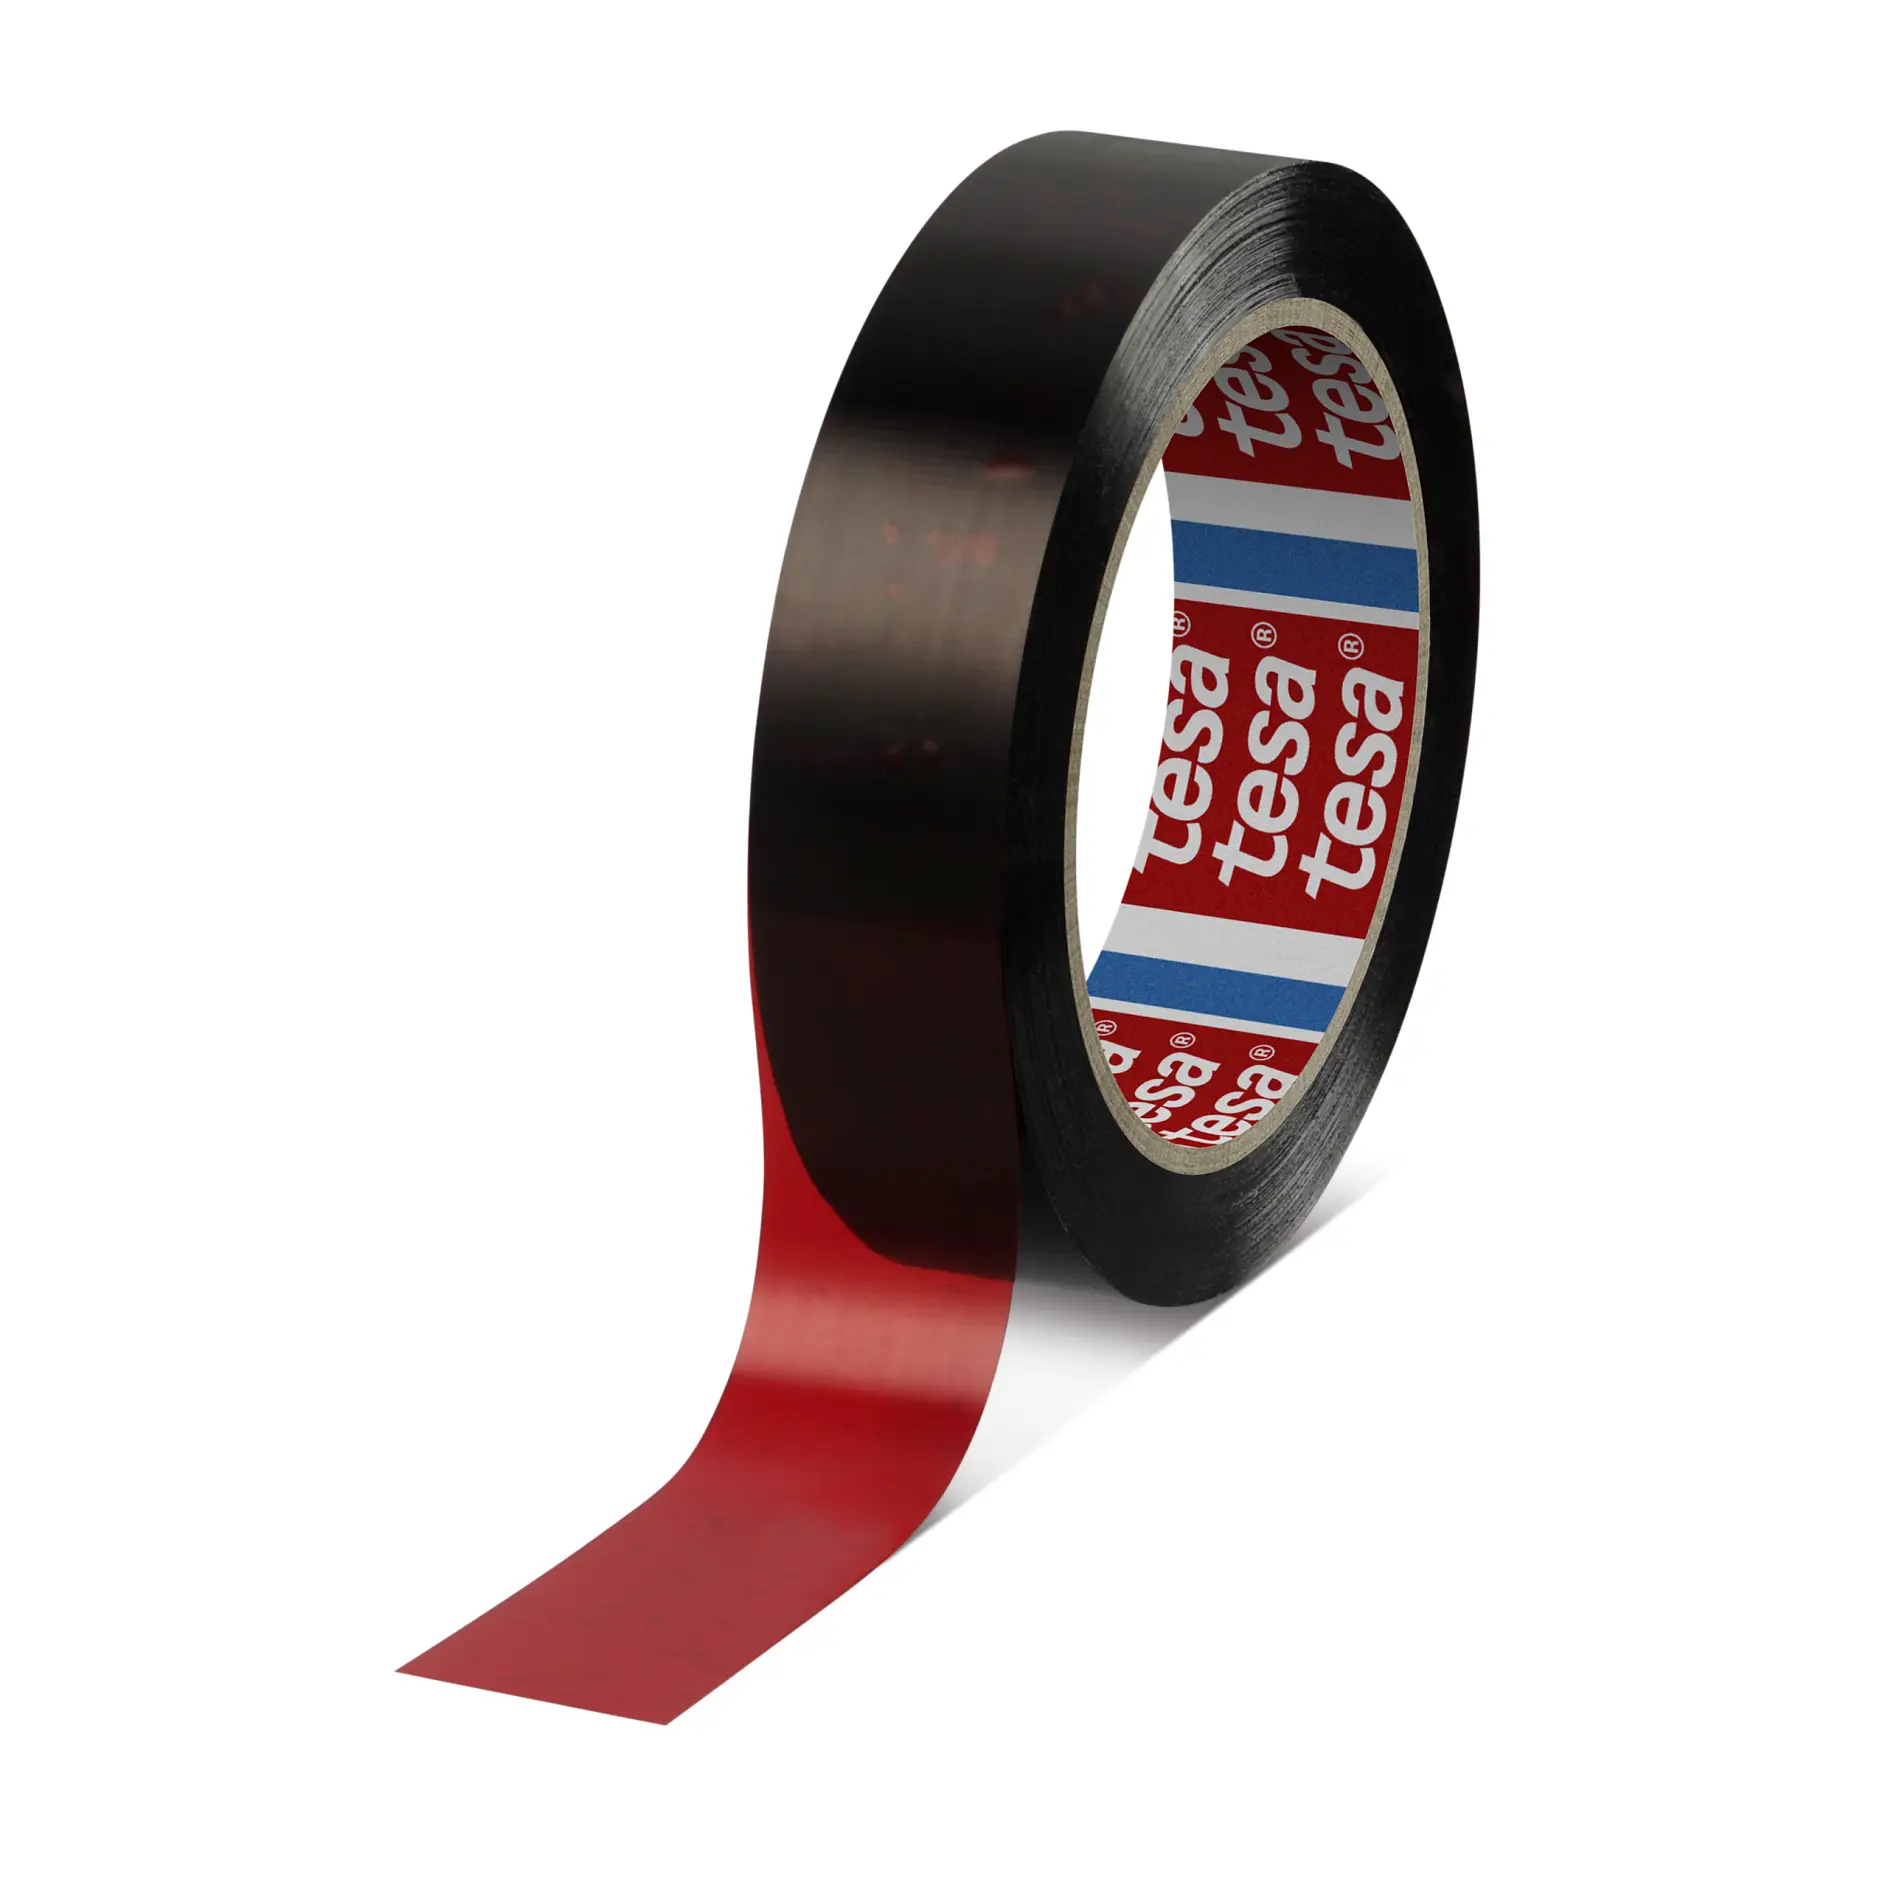 tesa-4156-pv1-specialty-tape-for-film-mounting-red-041560001301-pr